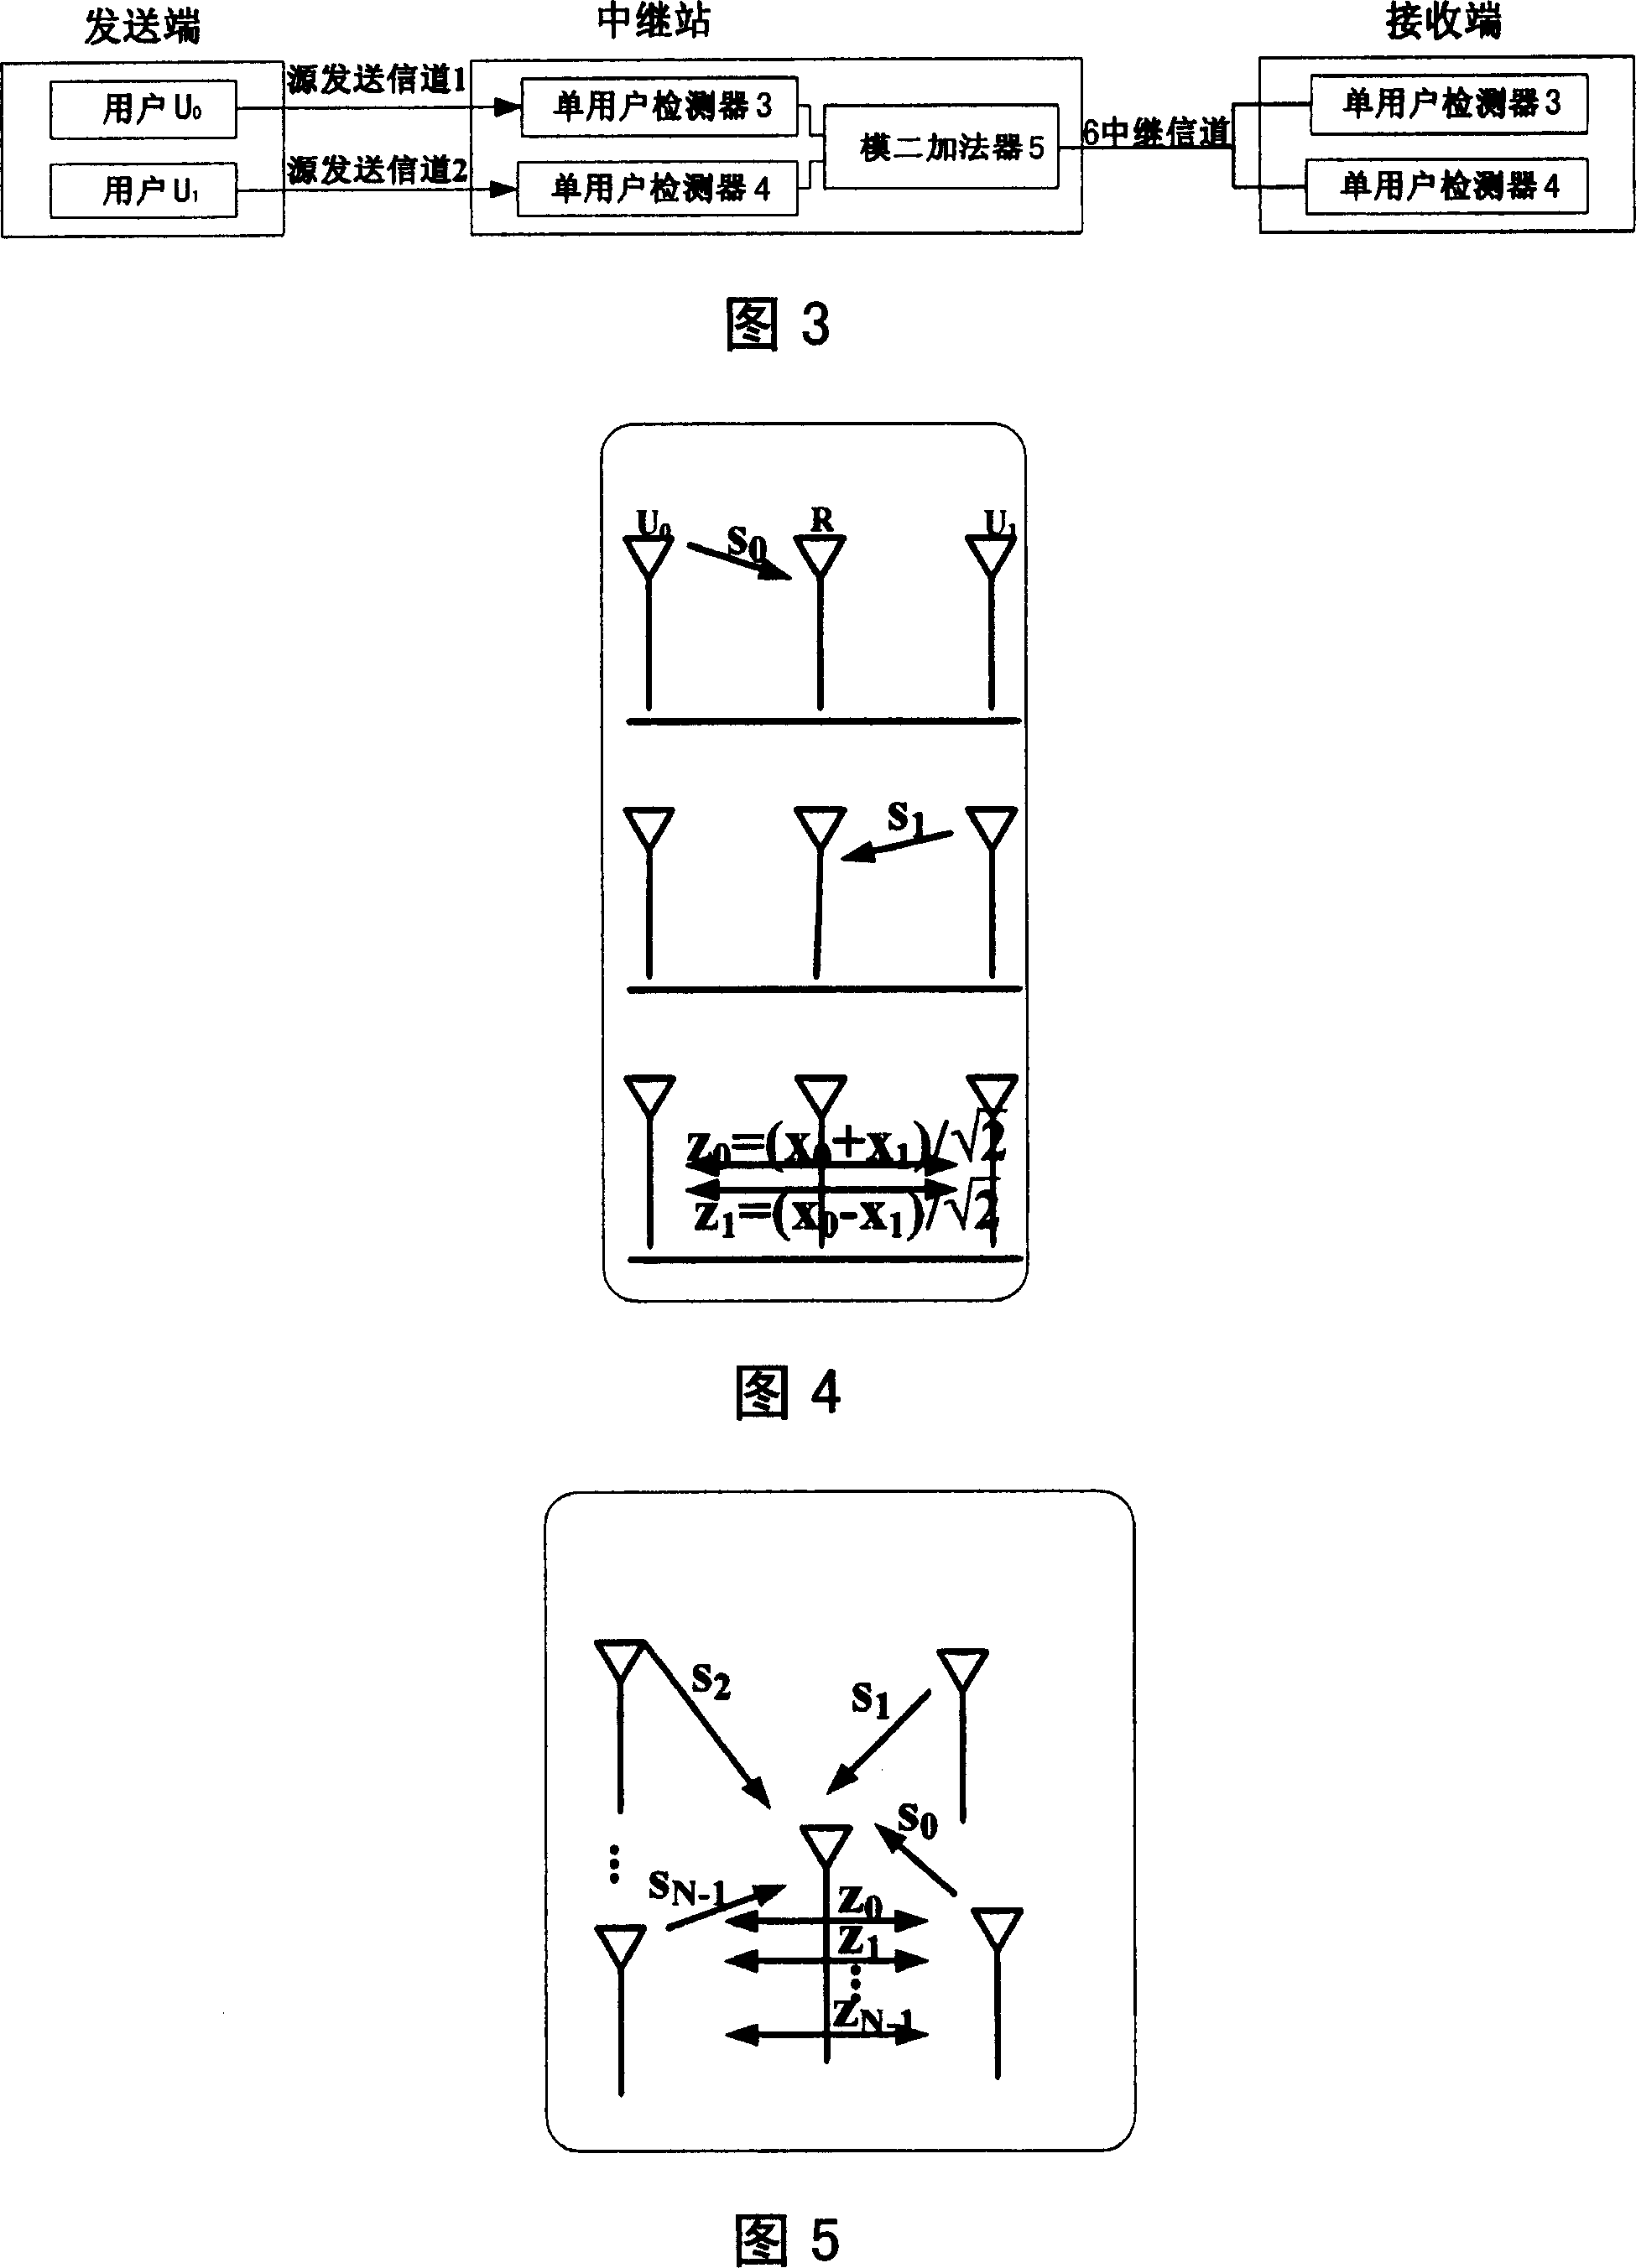 Multiuser transmission diversity and relay method and system